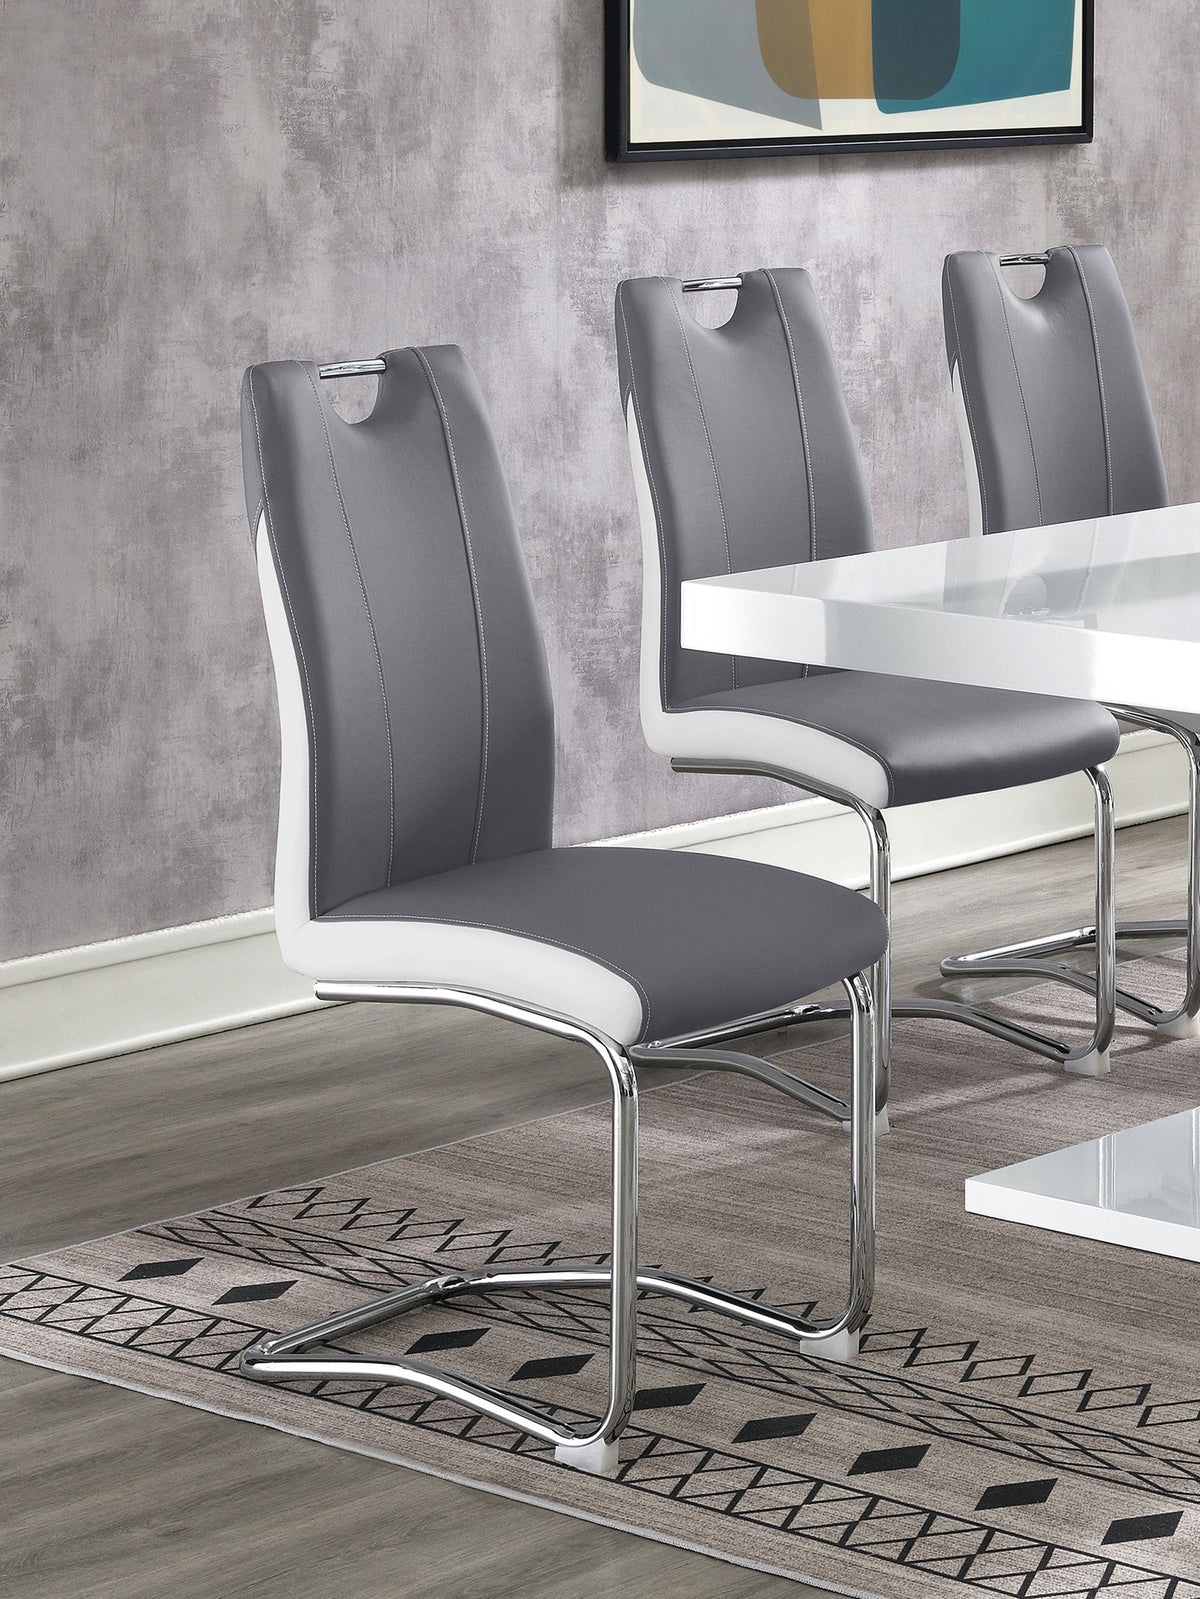 Brooklyn Upholstered Side Chairs with S-frame (Set of 4) Grey and White  Half Price Furniture